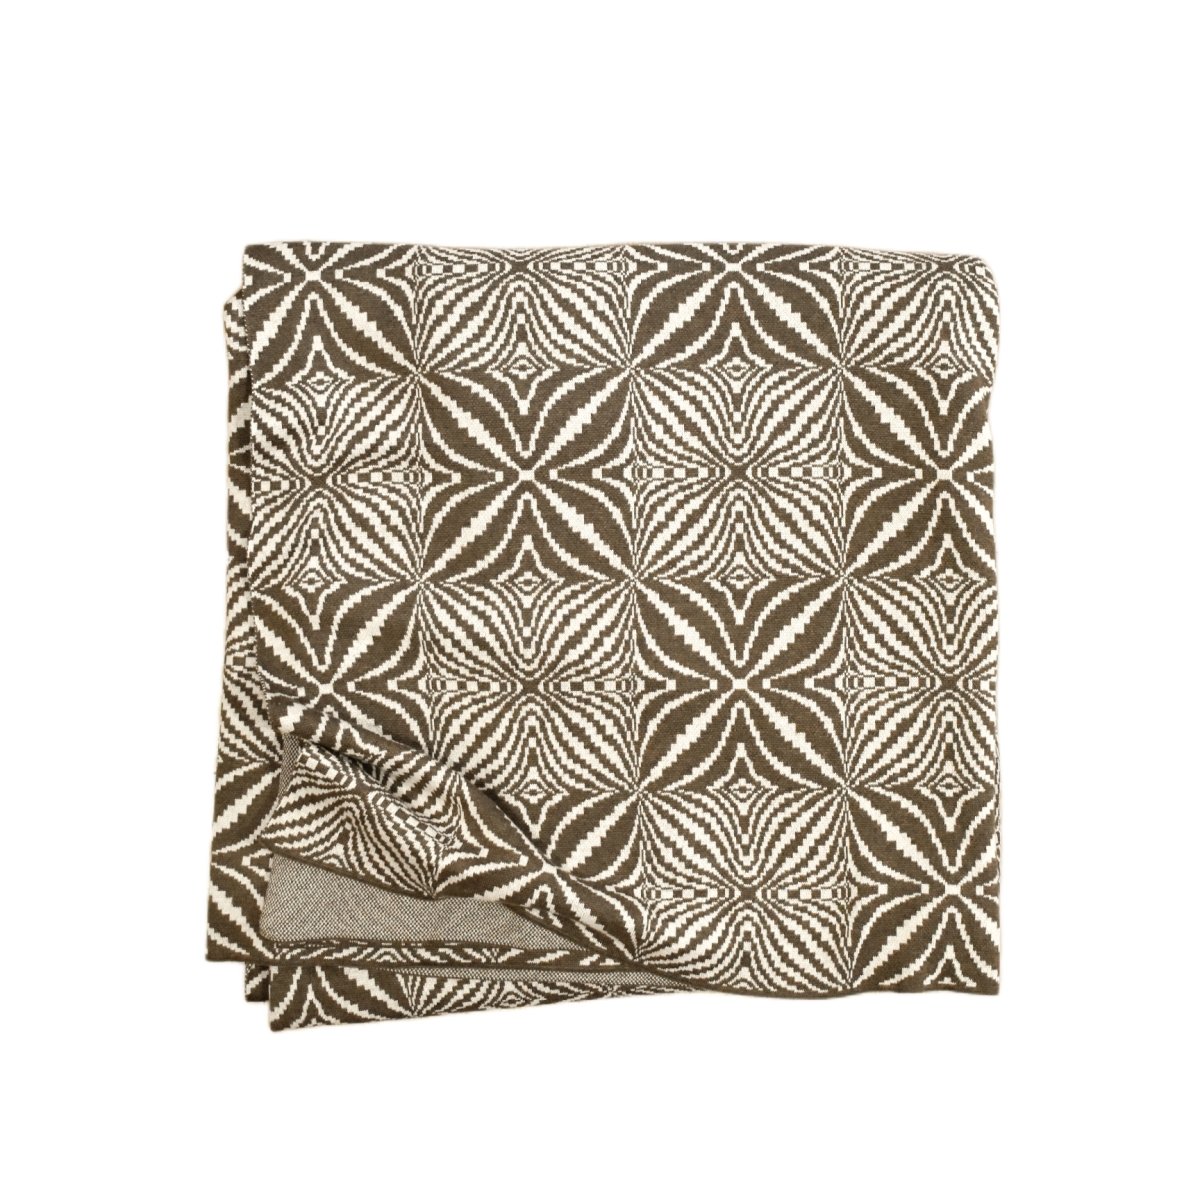 Bow Knot Check Blanket - Brown - SpaceHavenHome